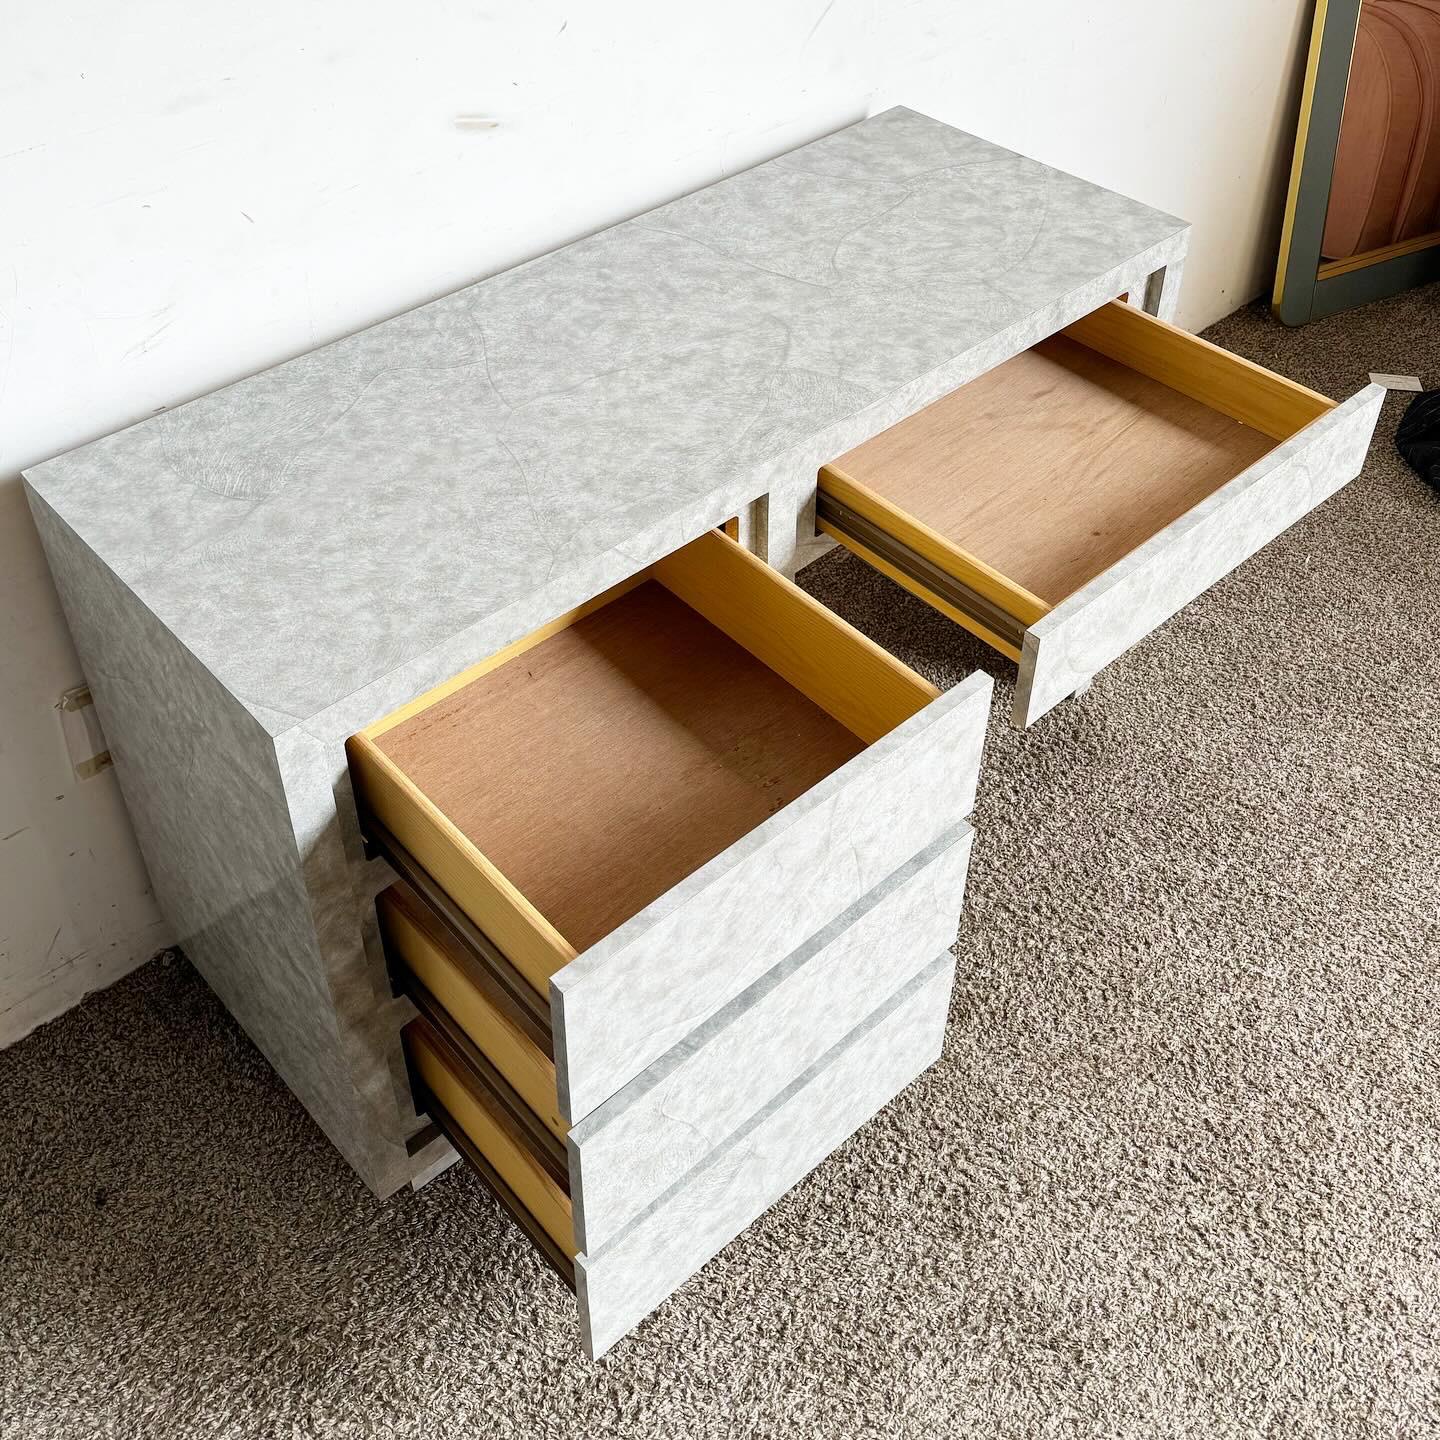 Postmodern Gray Faux Stone Laminate Writing Desk - 4 Drawers In Good Condition For Sale In Delray Beach, FL